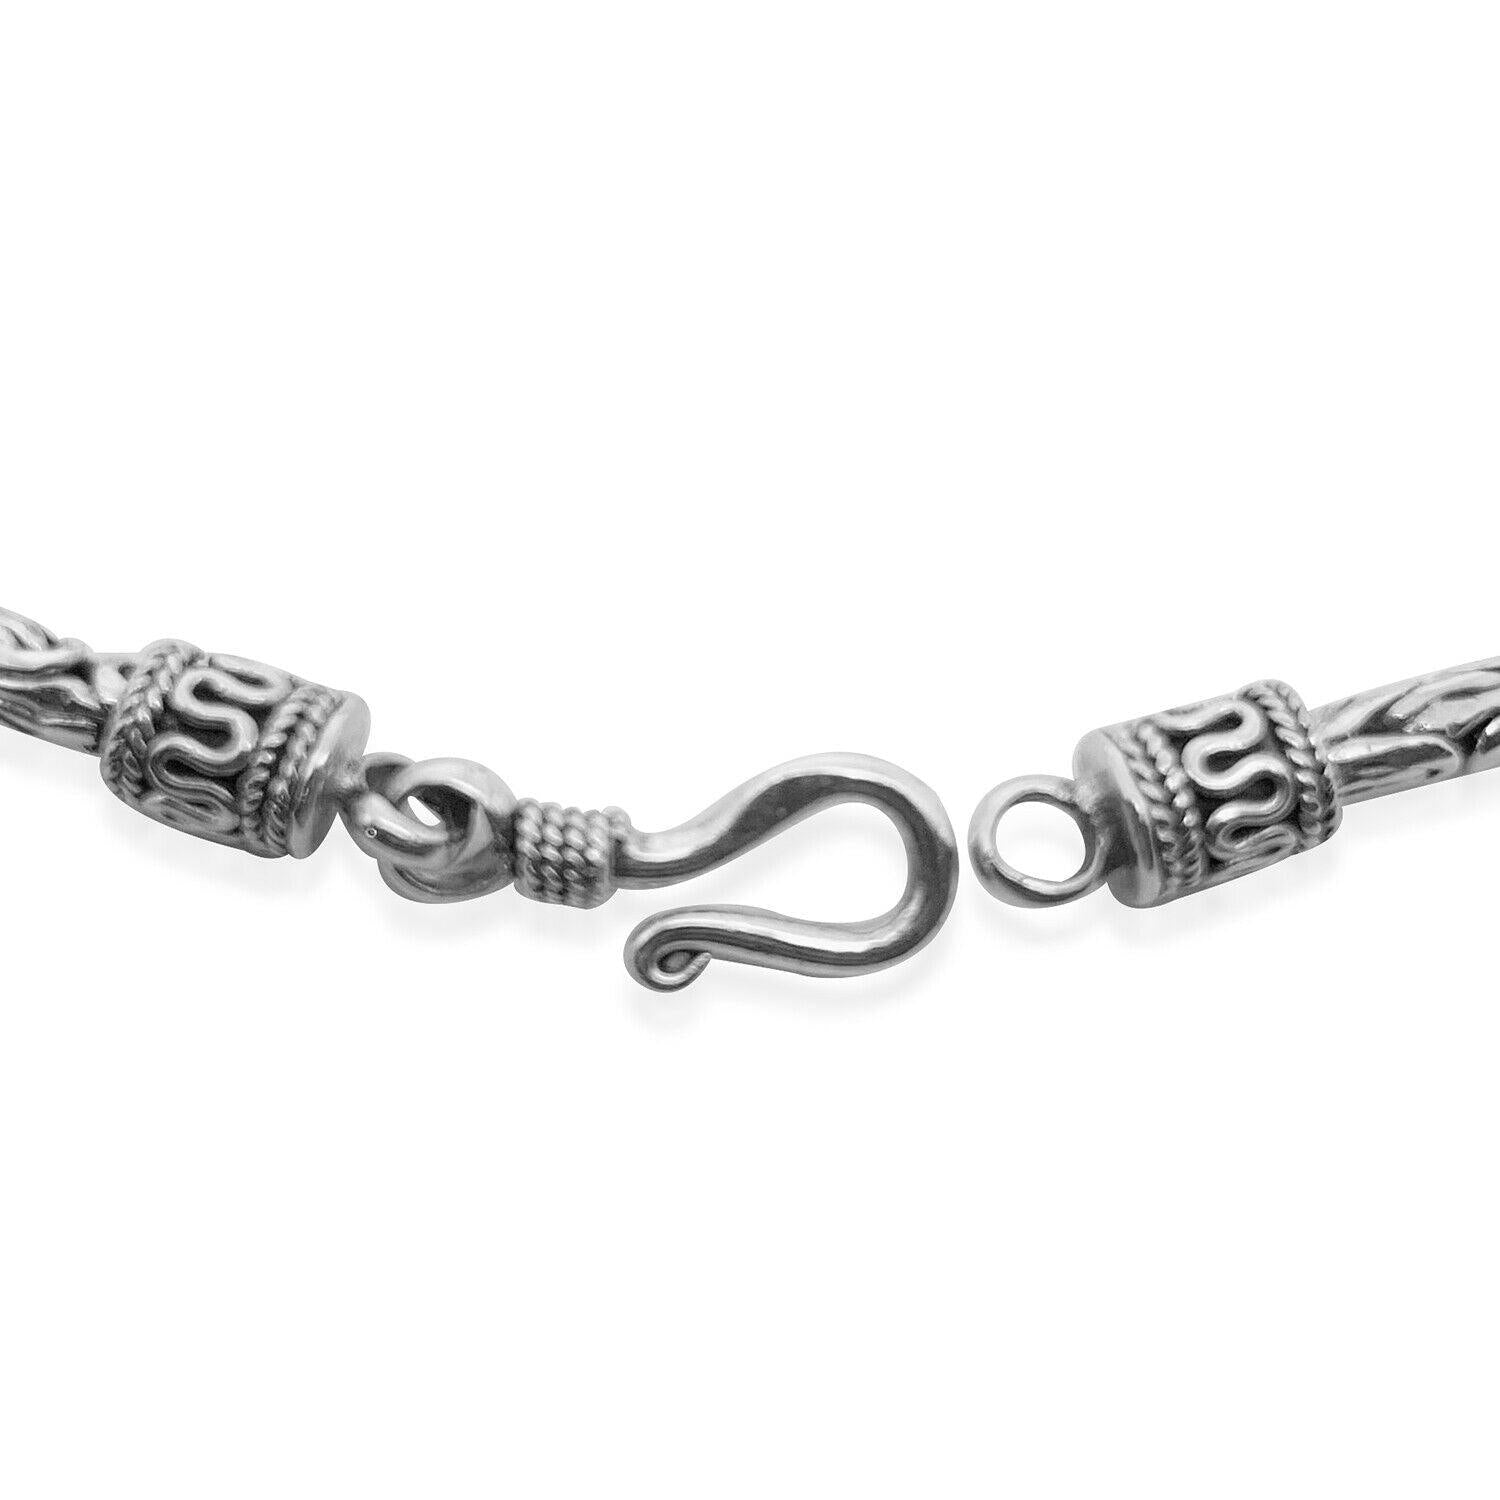 Handmade 2.5 mm Solid 925 Sterling Silver Balinese BYZANTINE Borobudur Link Chain Necklace Oxidized 18, 24, 30 and 36 inches - Inspiring Jewellery